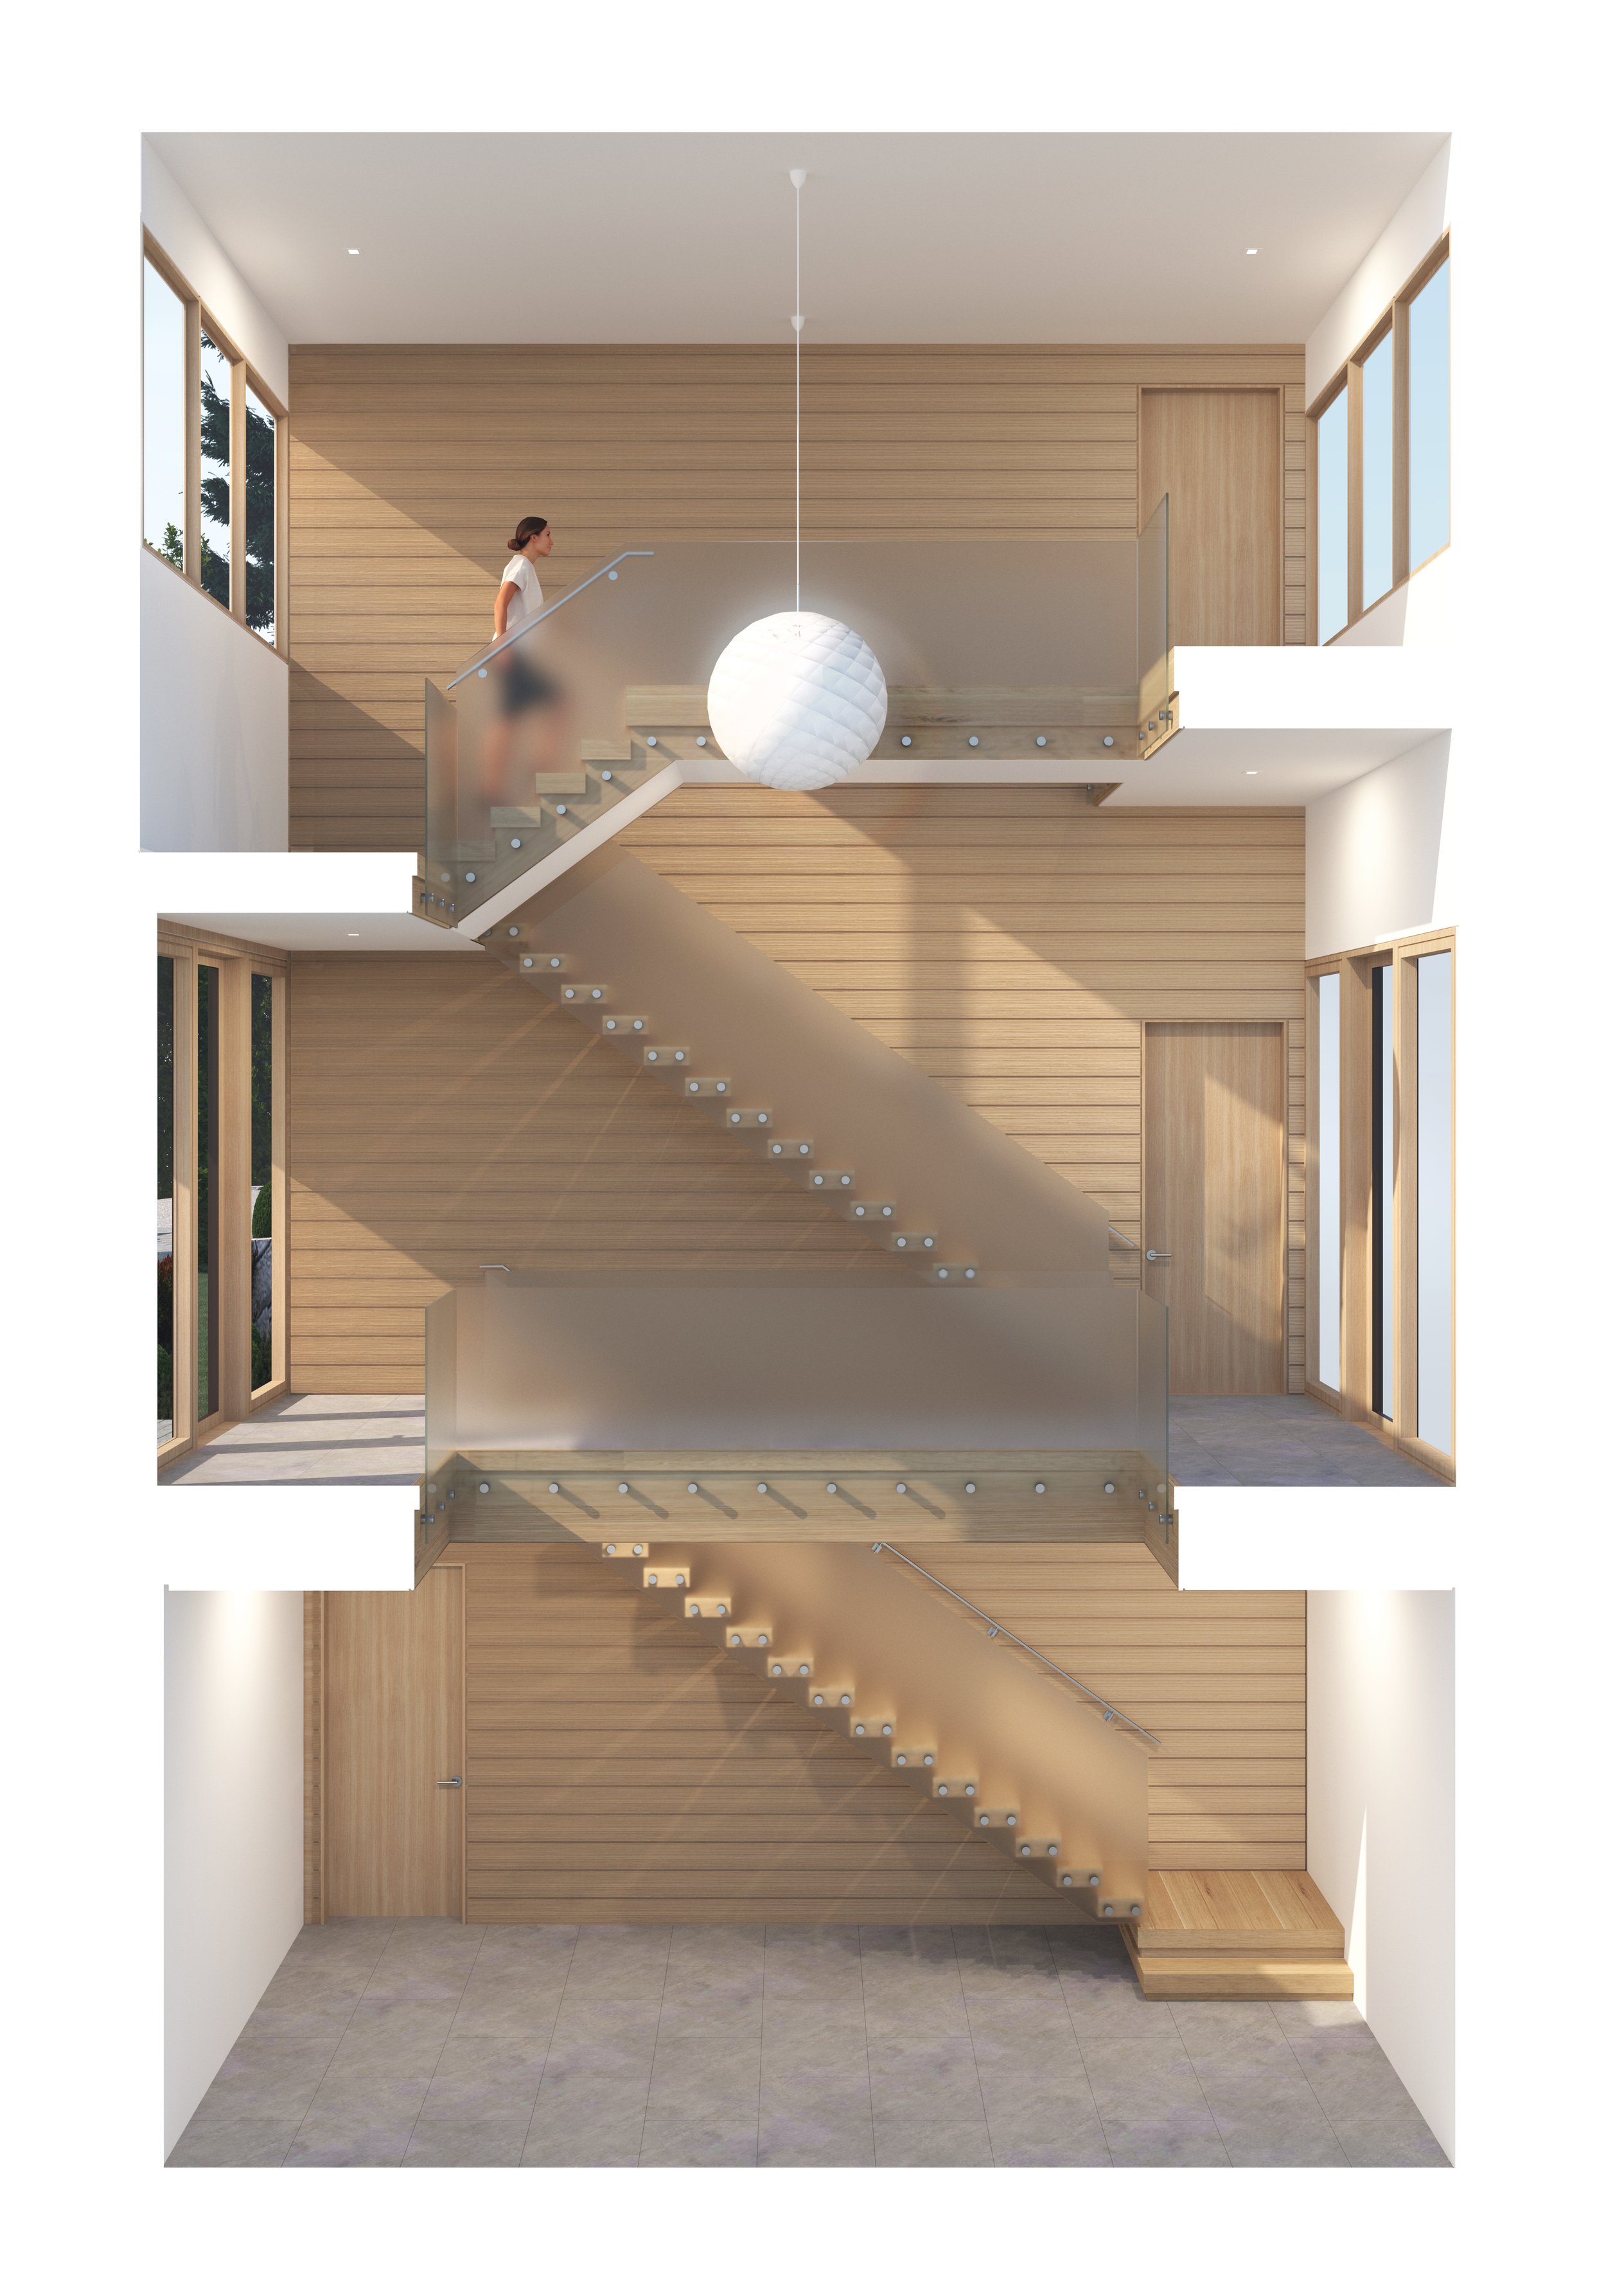 VESON_2021_12 STAIR Section perspective.jpg